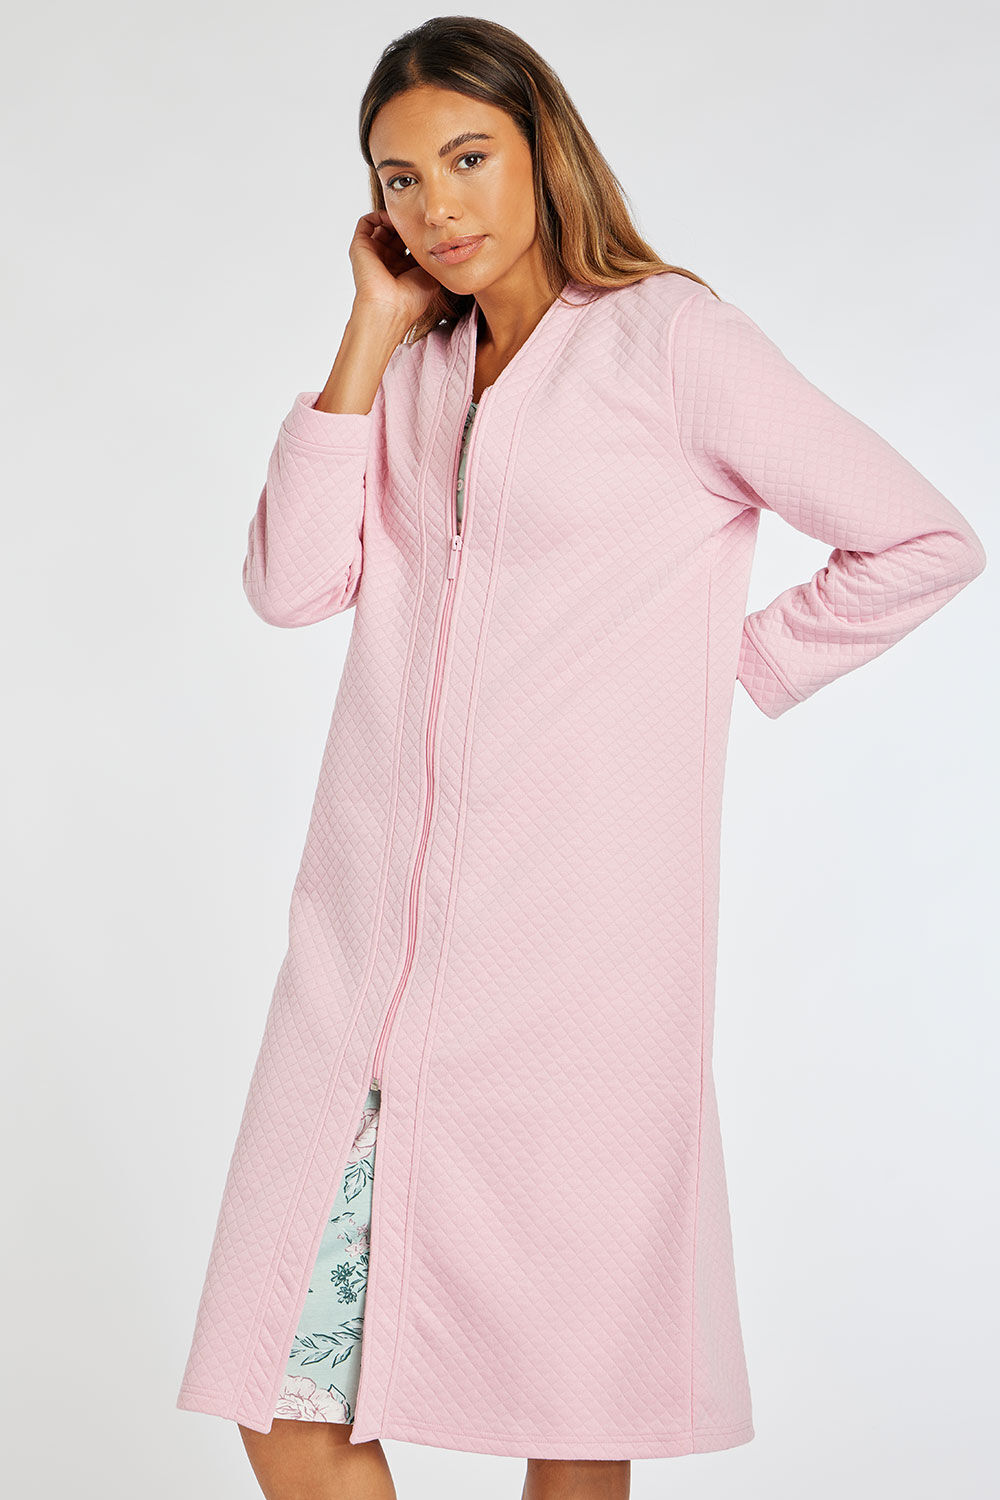 Bonmarche Pink Diamond Quilted Robe With Zip Through Fastening, Size: 16-18